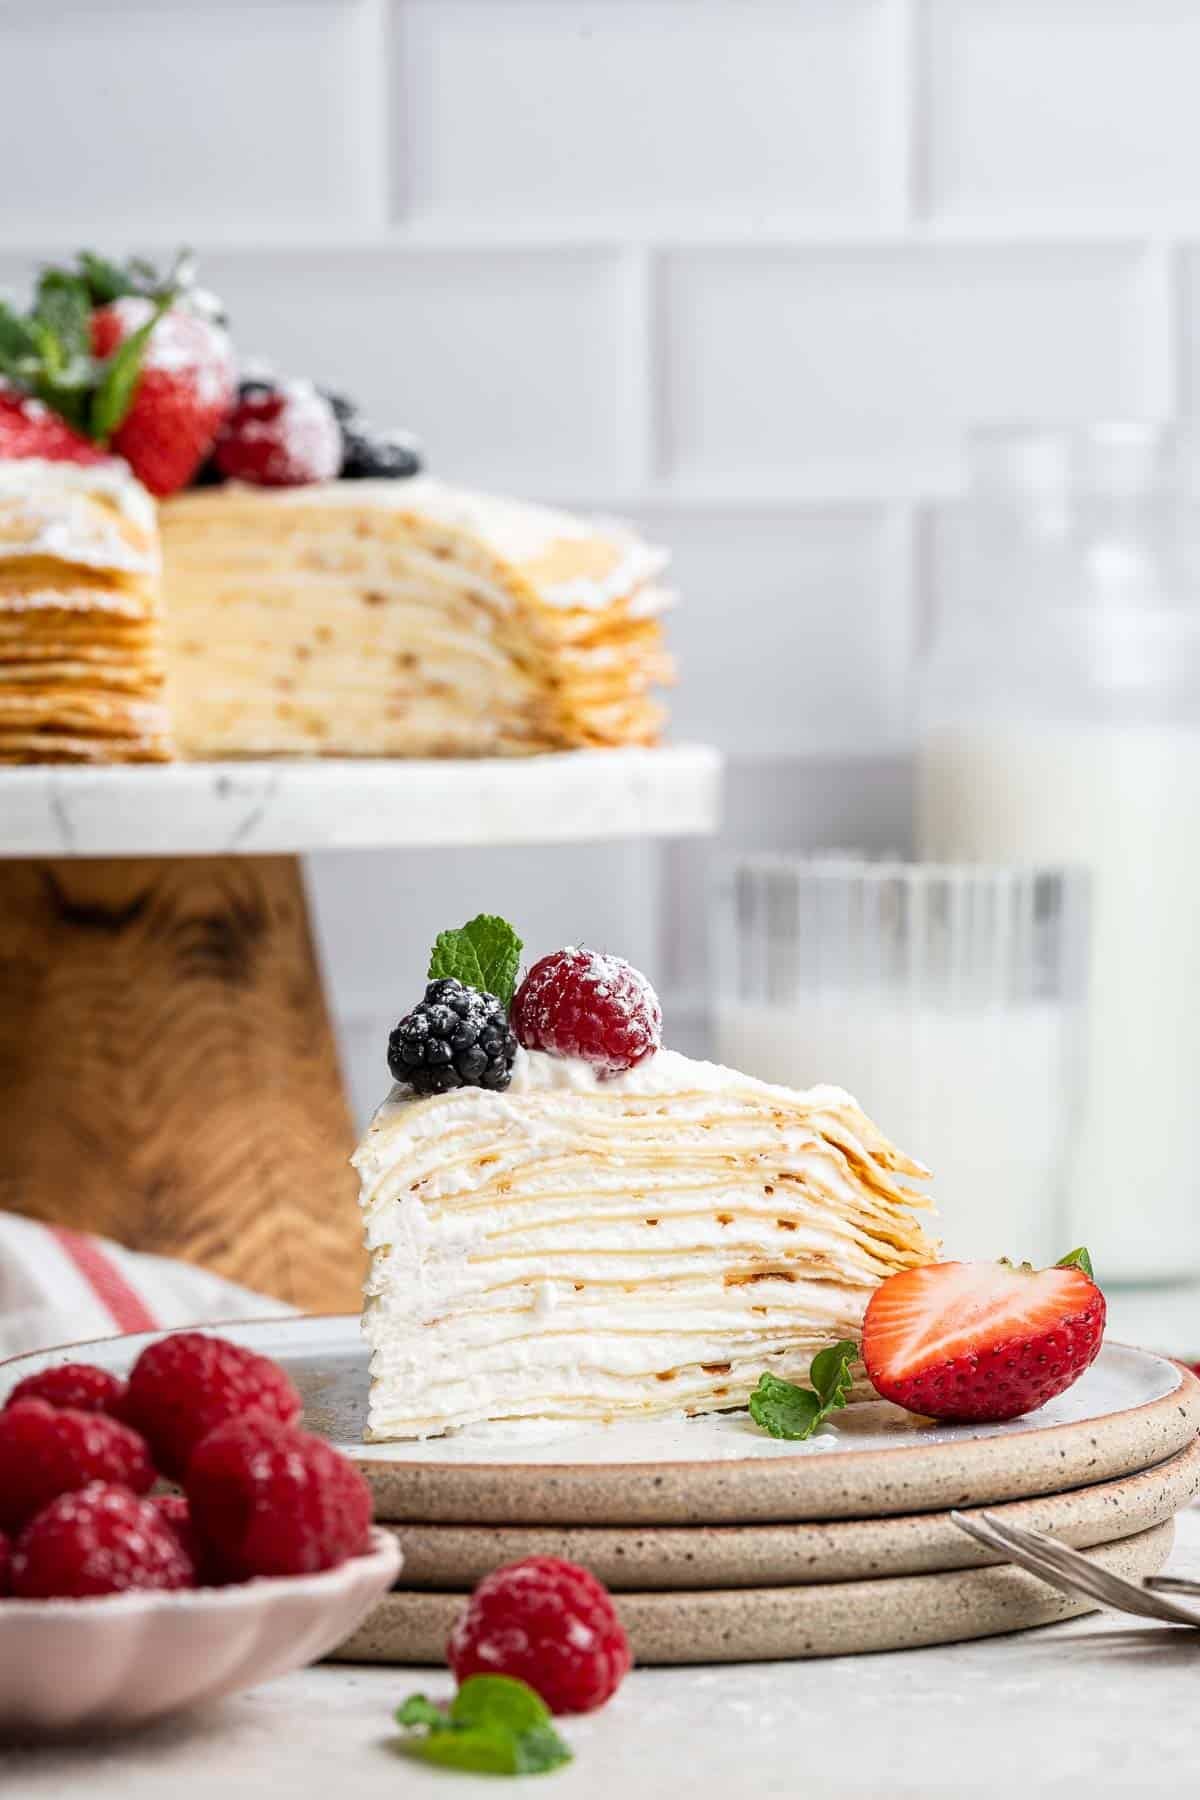 Crepe cake on a cake stand with one piece missing on plate and fresh berries.